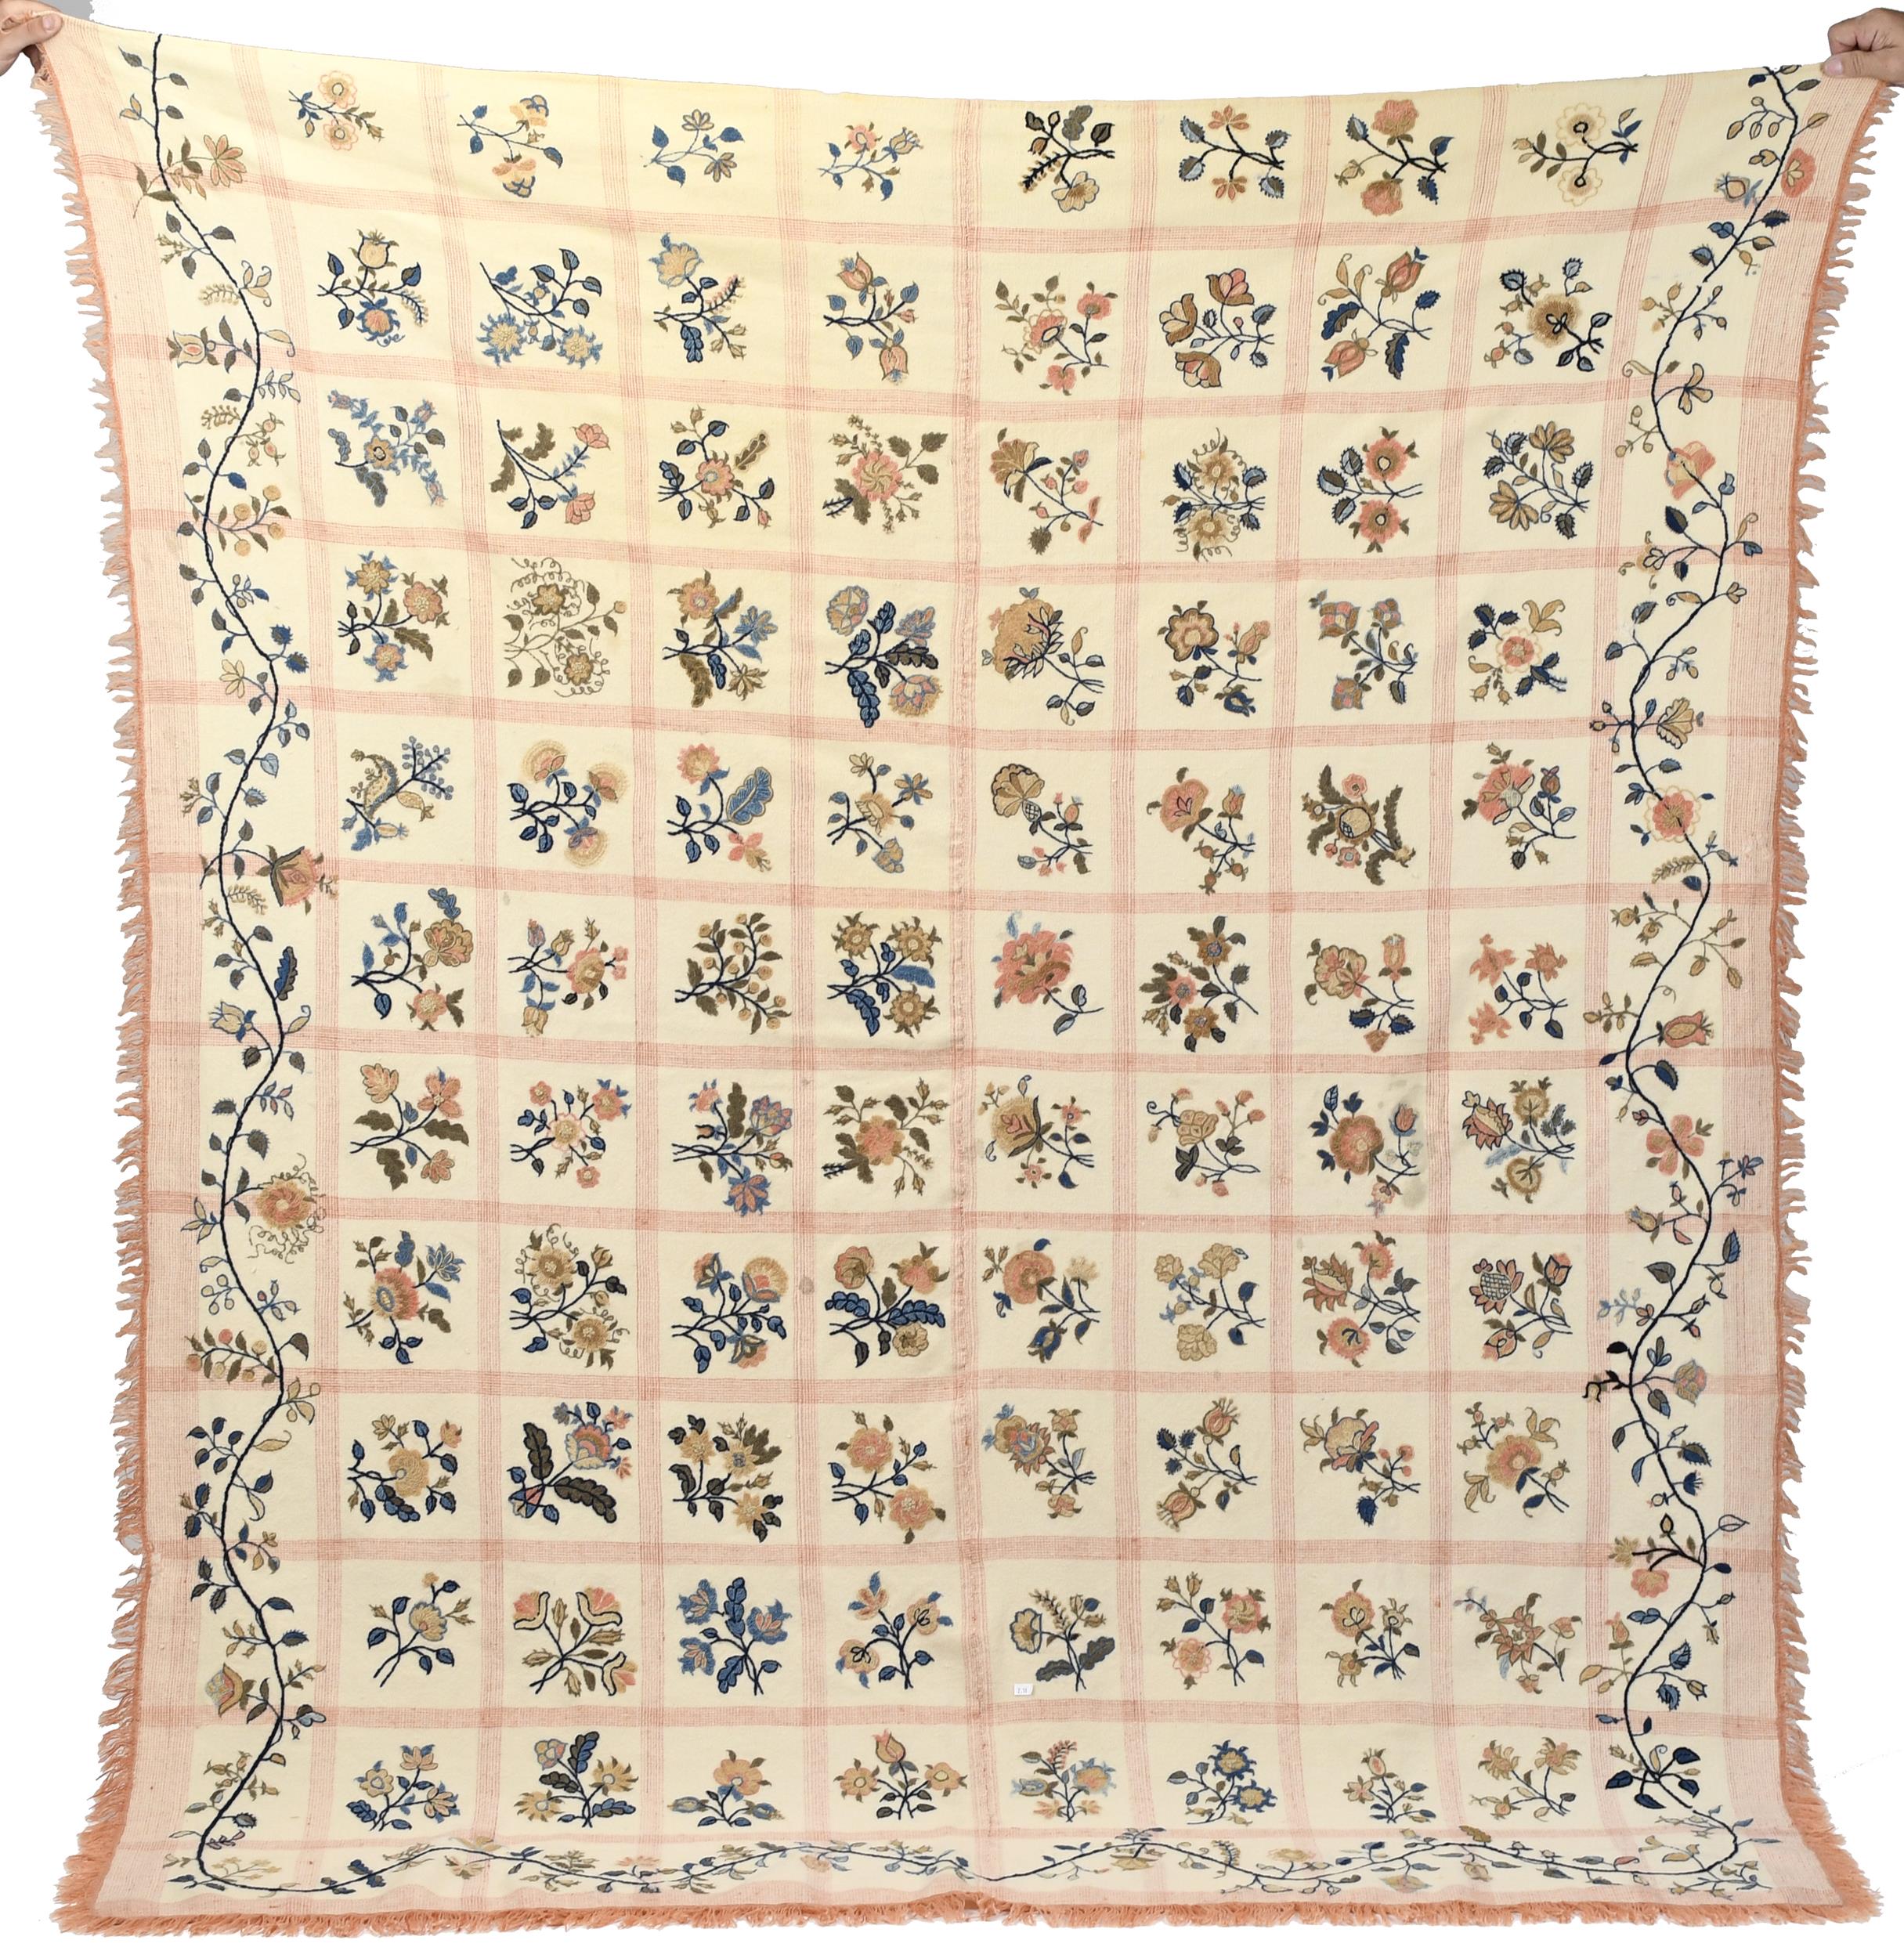 19TH C. POLYCHROME HAND EMBROIDERED